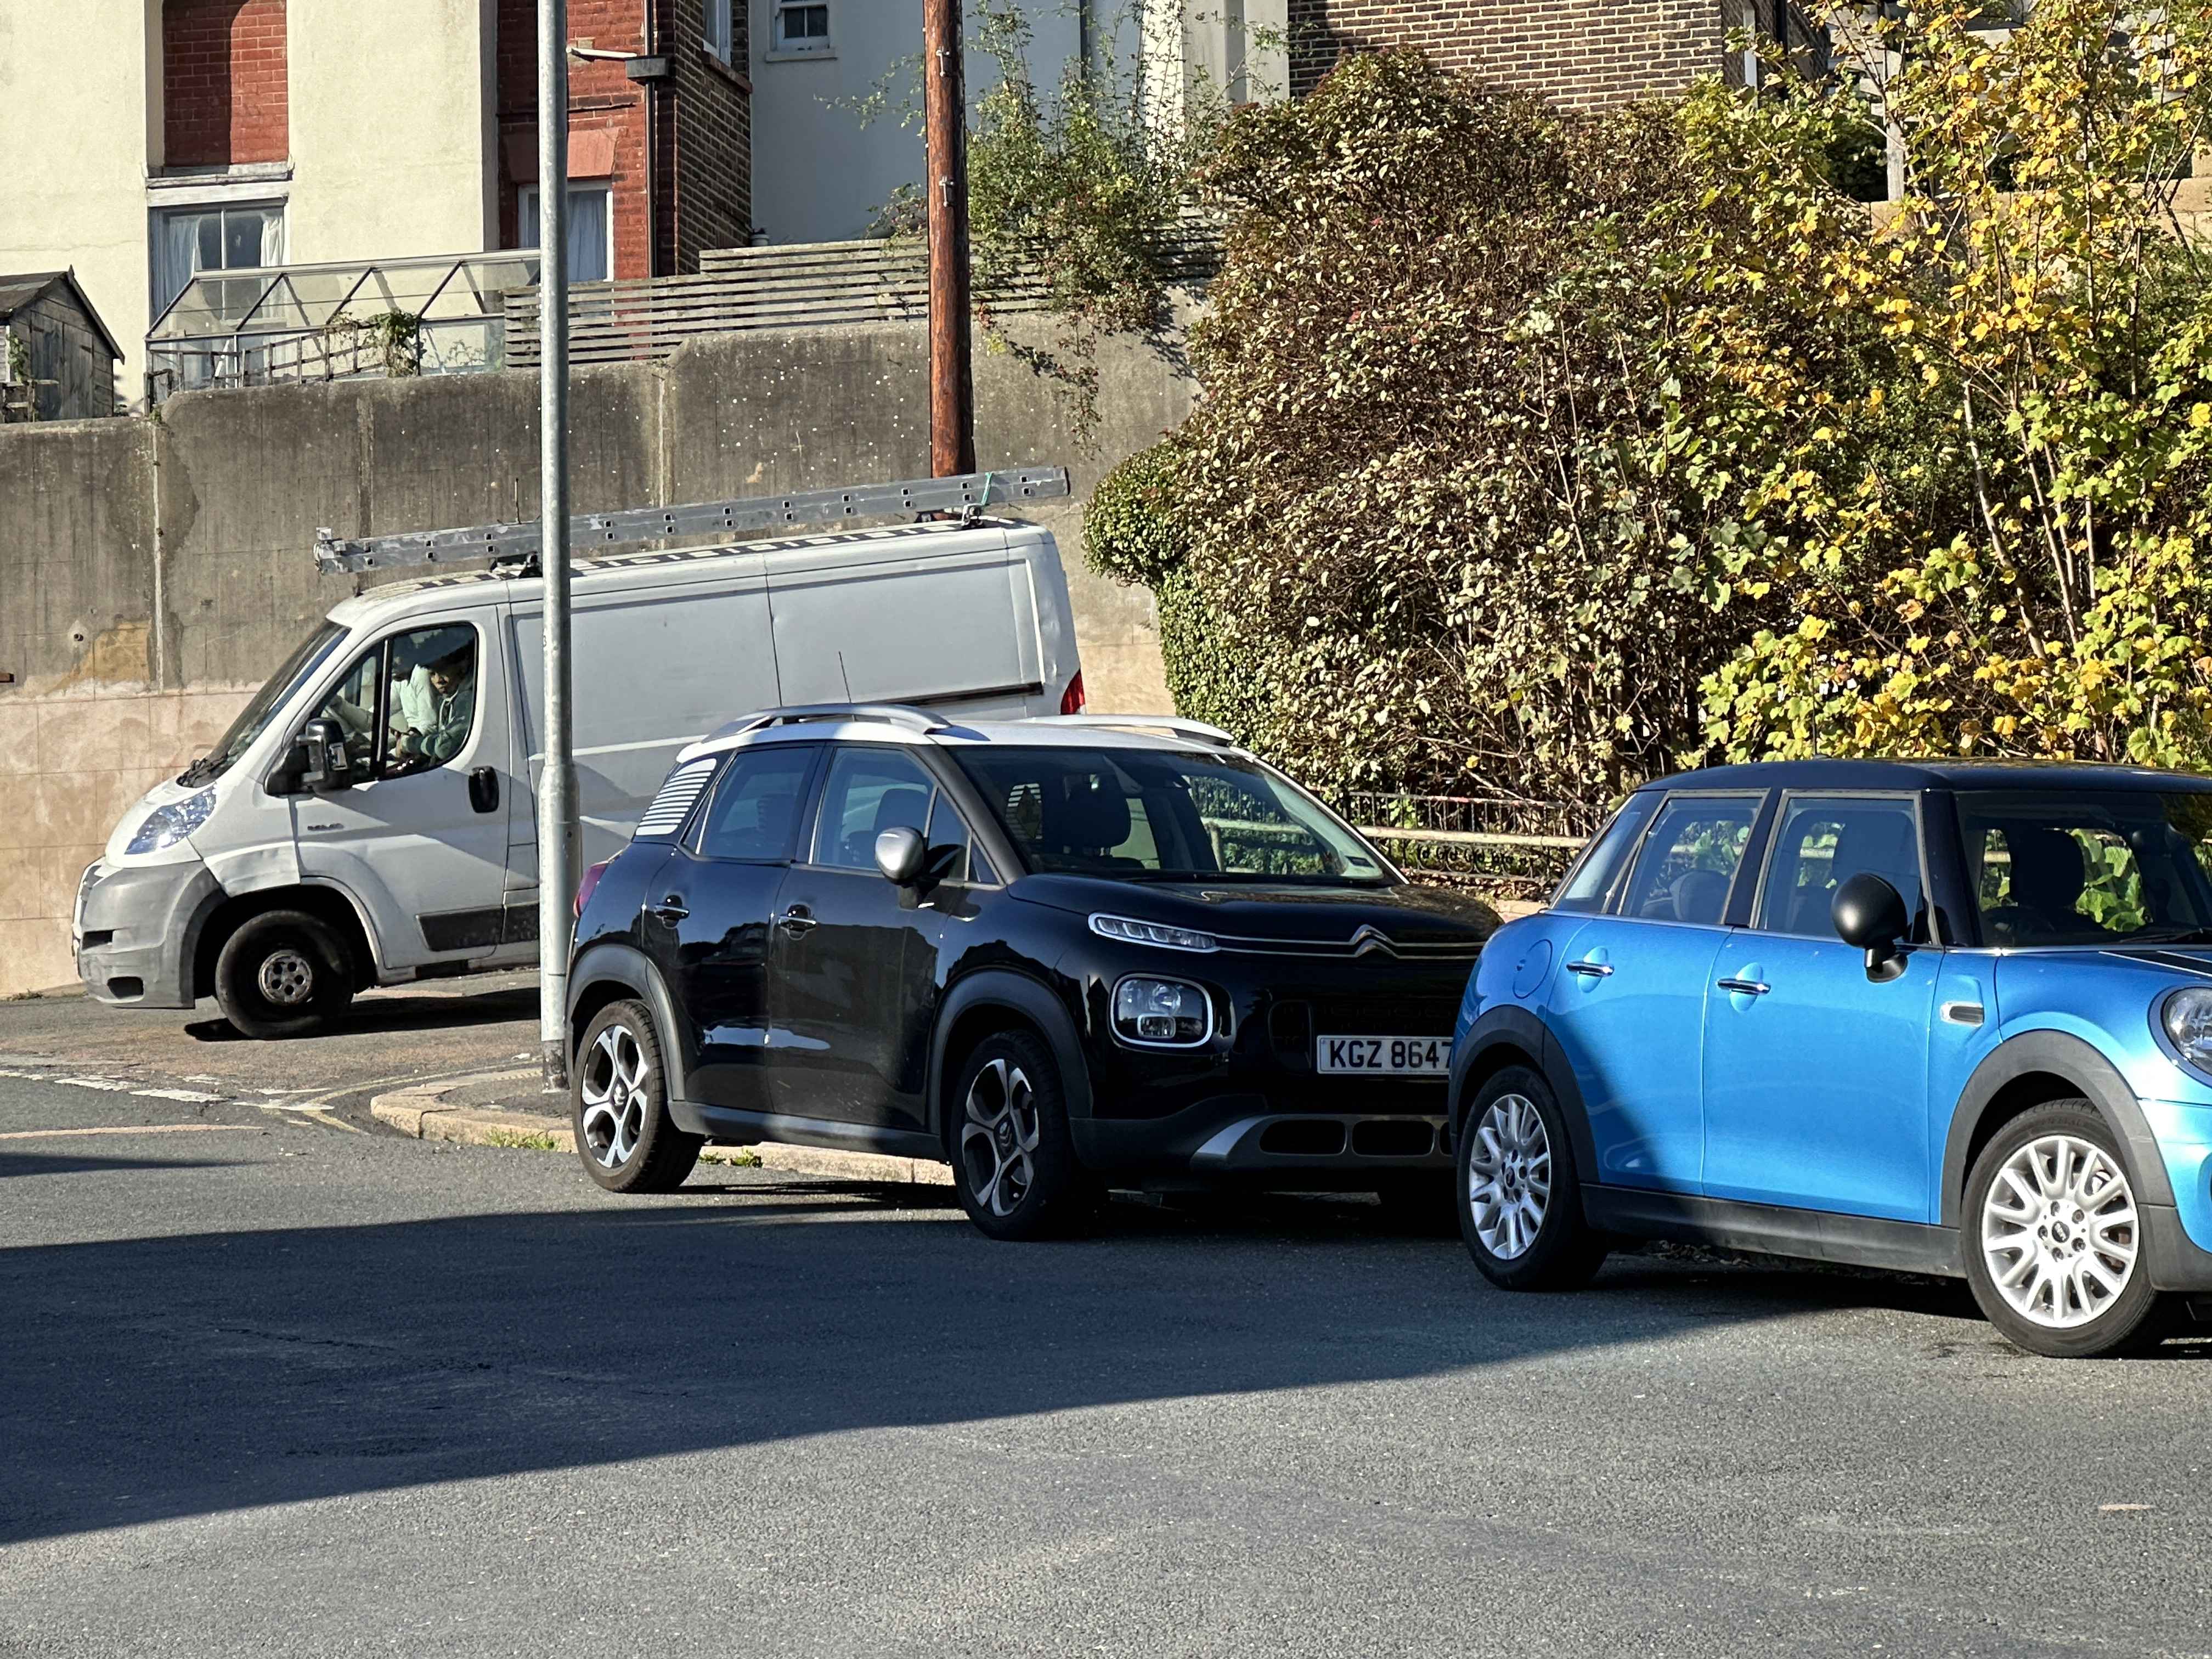 Photograph of KGZ 8647 - a Black Citroen C3 parked in Hollingdean by a non-resident who uses the local area as part of their Brighton commute. The third of five photographs supplied by the residents of Hollingdean.